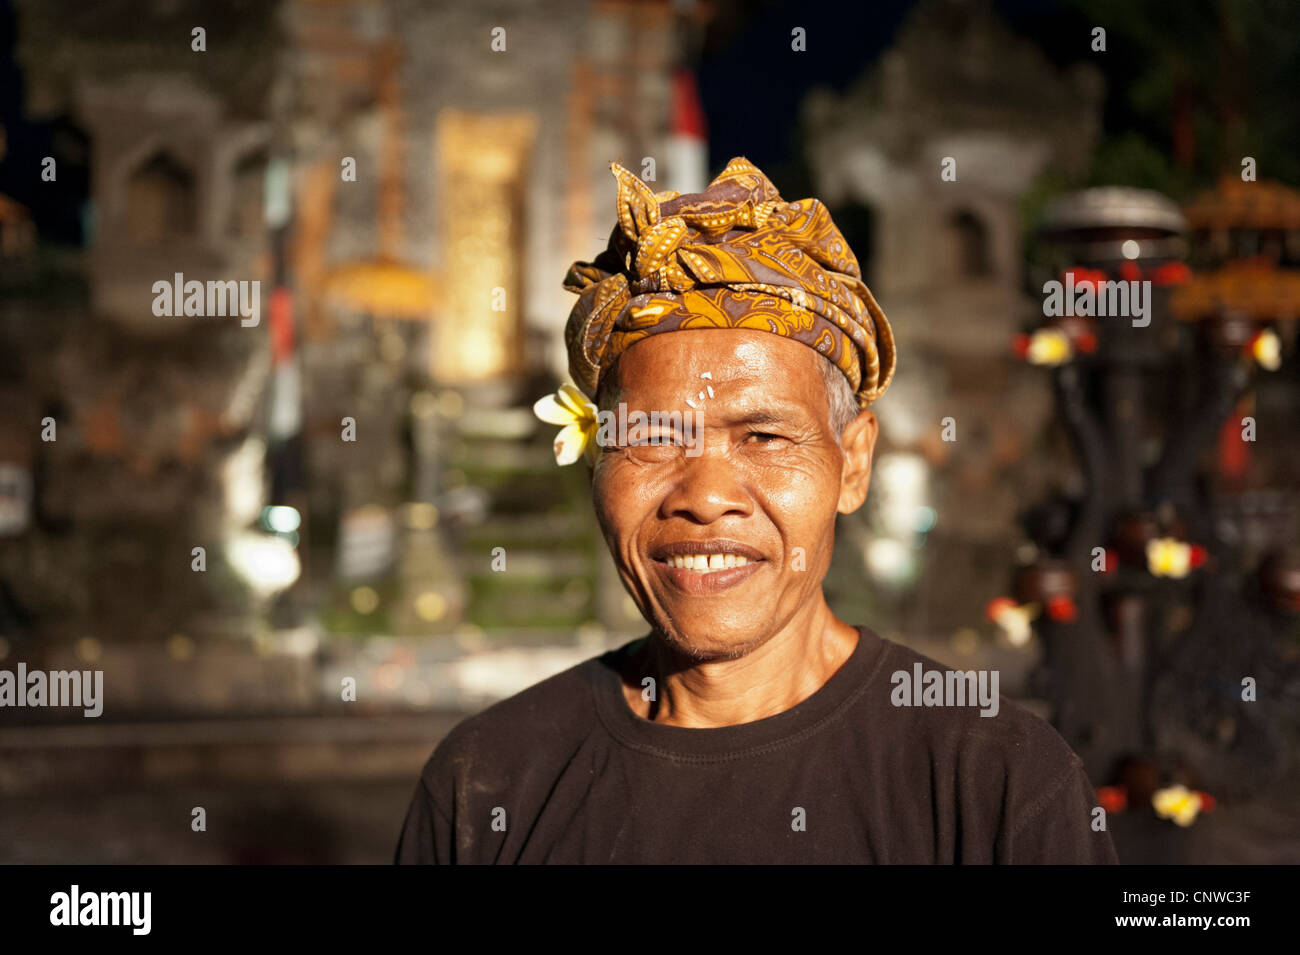 Helper getting ready for the Balinese dancing show, Ubud, Bali, Indonesia Stock Photo